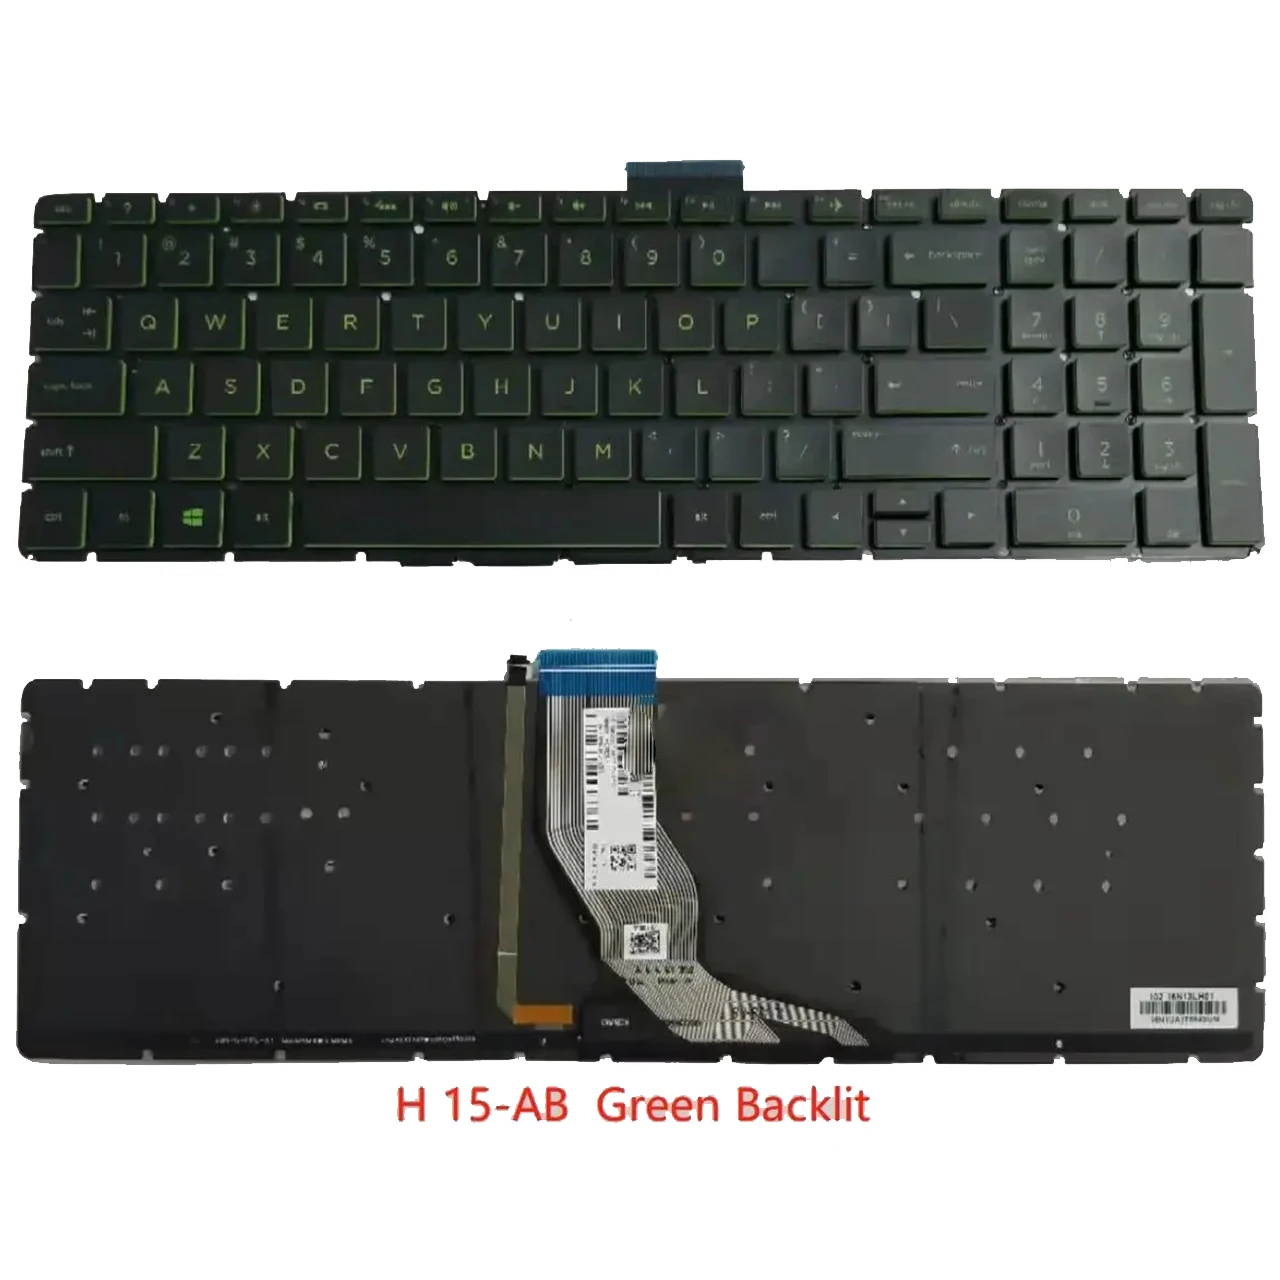 

English US keyboard For HP Pavilion 15-AU 15-AB 15-AQ 15-AW 15-BK 15-BC 15-AN 15-an000 Green With Backlit